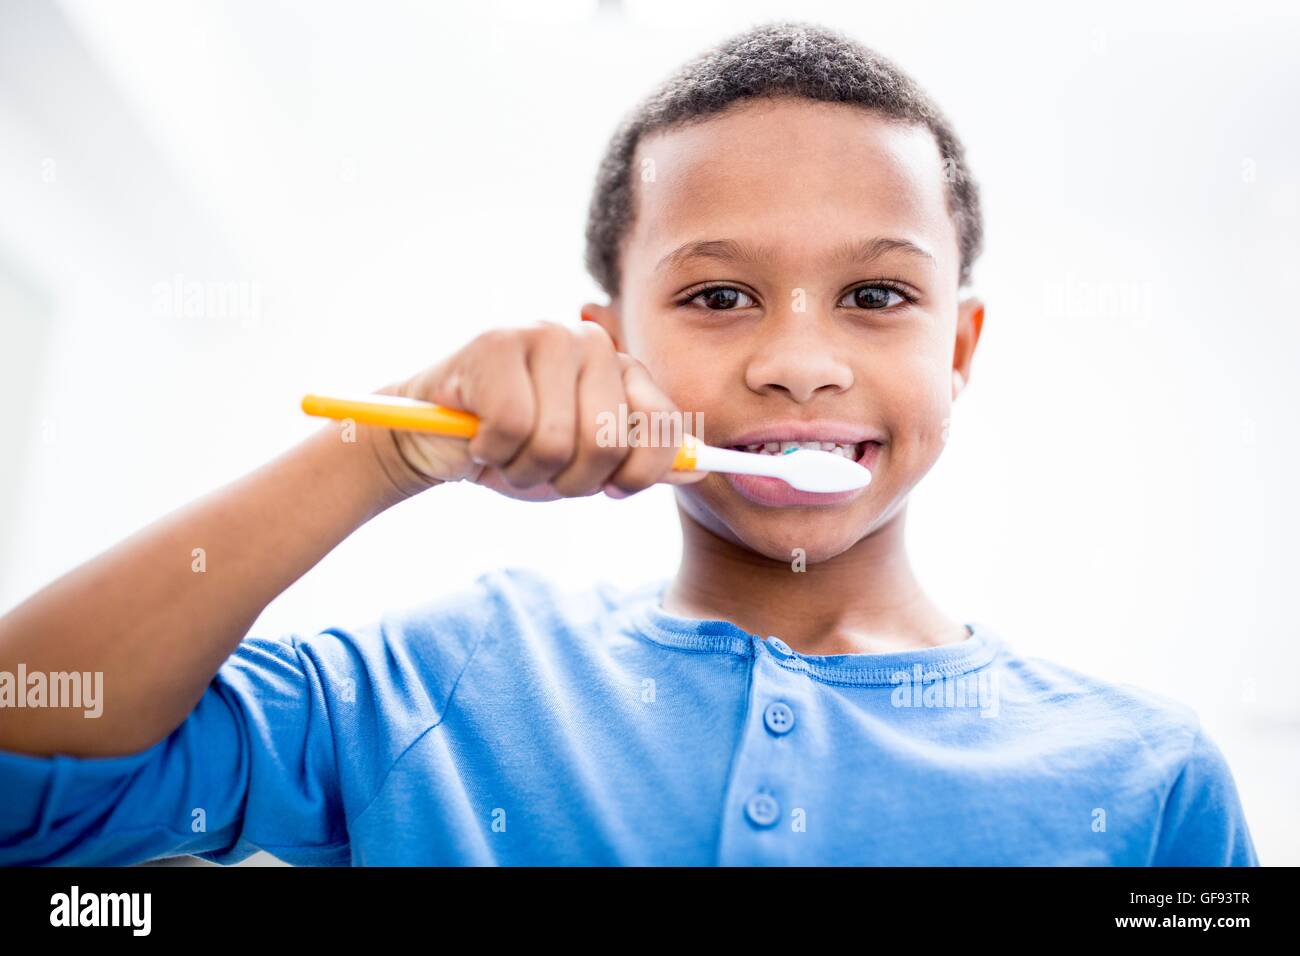 MODEL RELEASED. Boy brushing teeth, portrait, close-up. Stock Photo